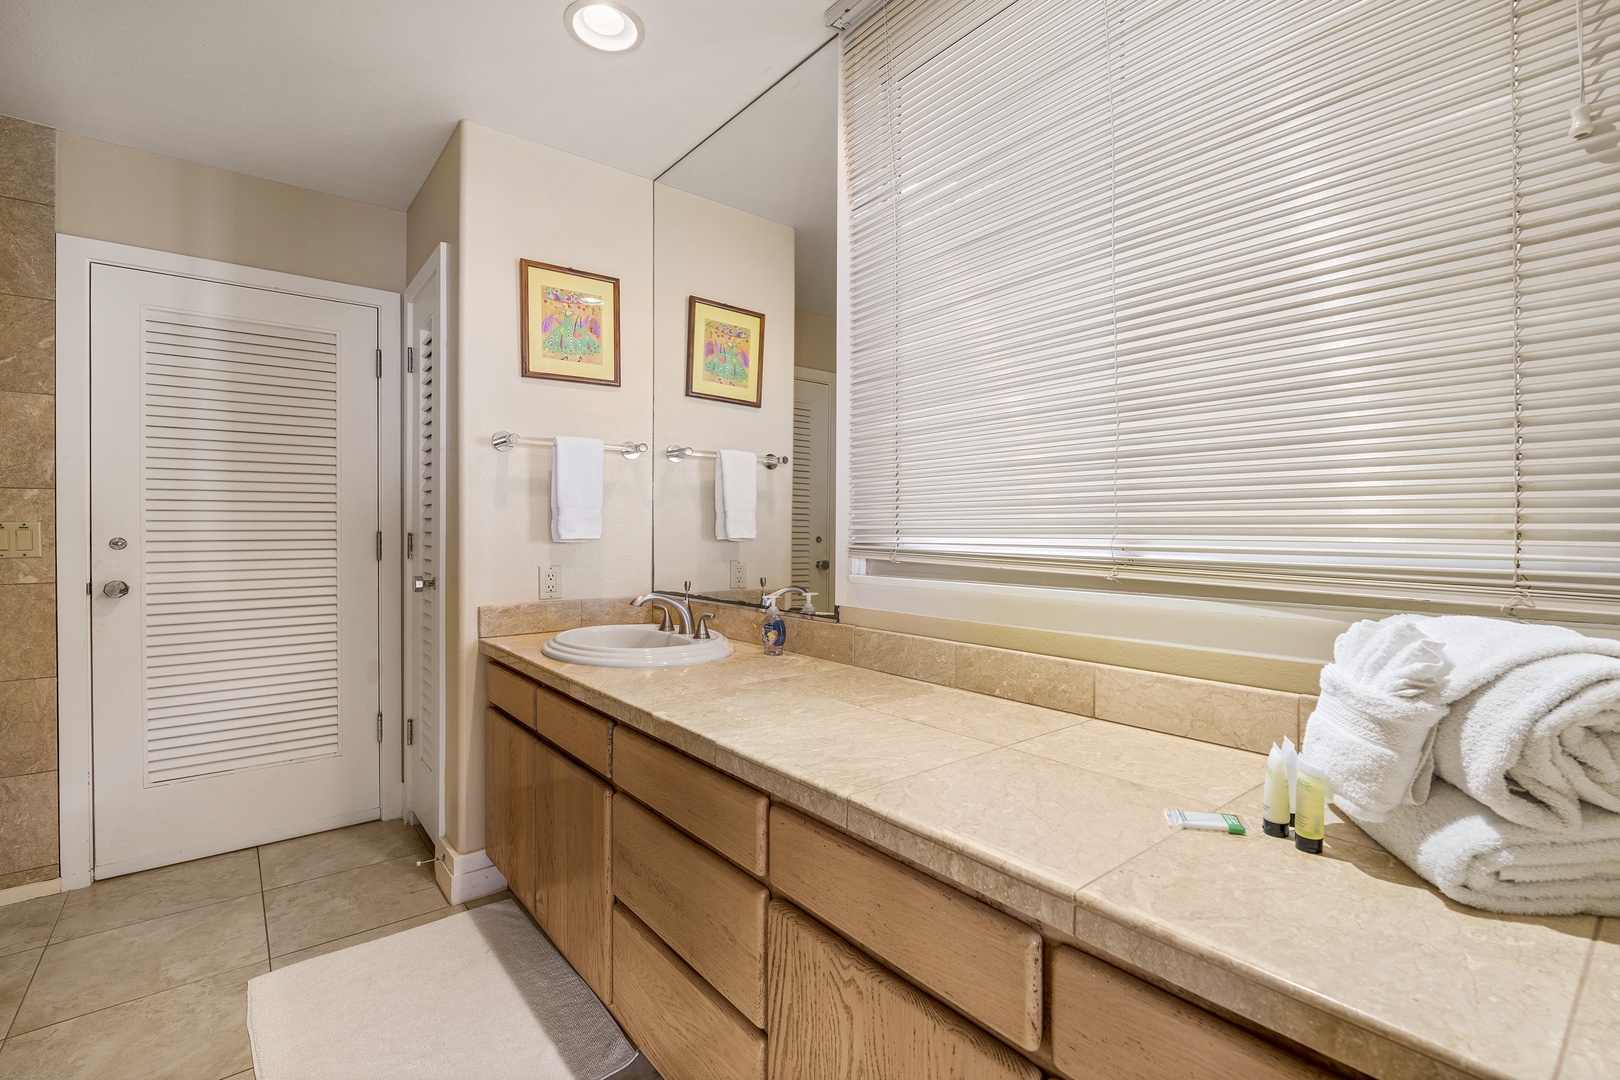 Kailua Kona Vacation Rentals, Ali'i Point #12 - Convenient ensuite to the guest bedroom